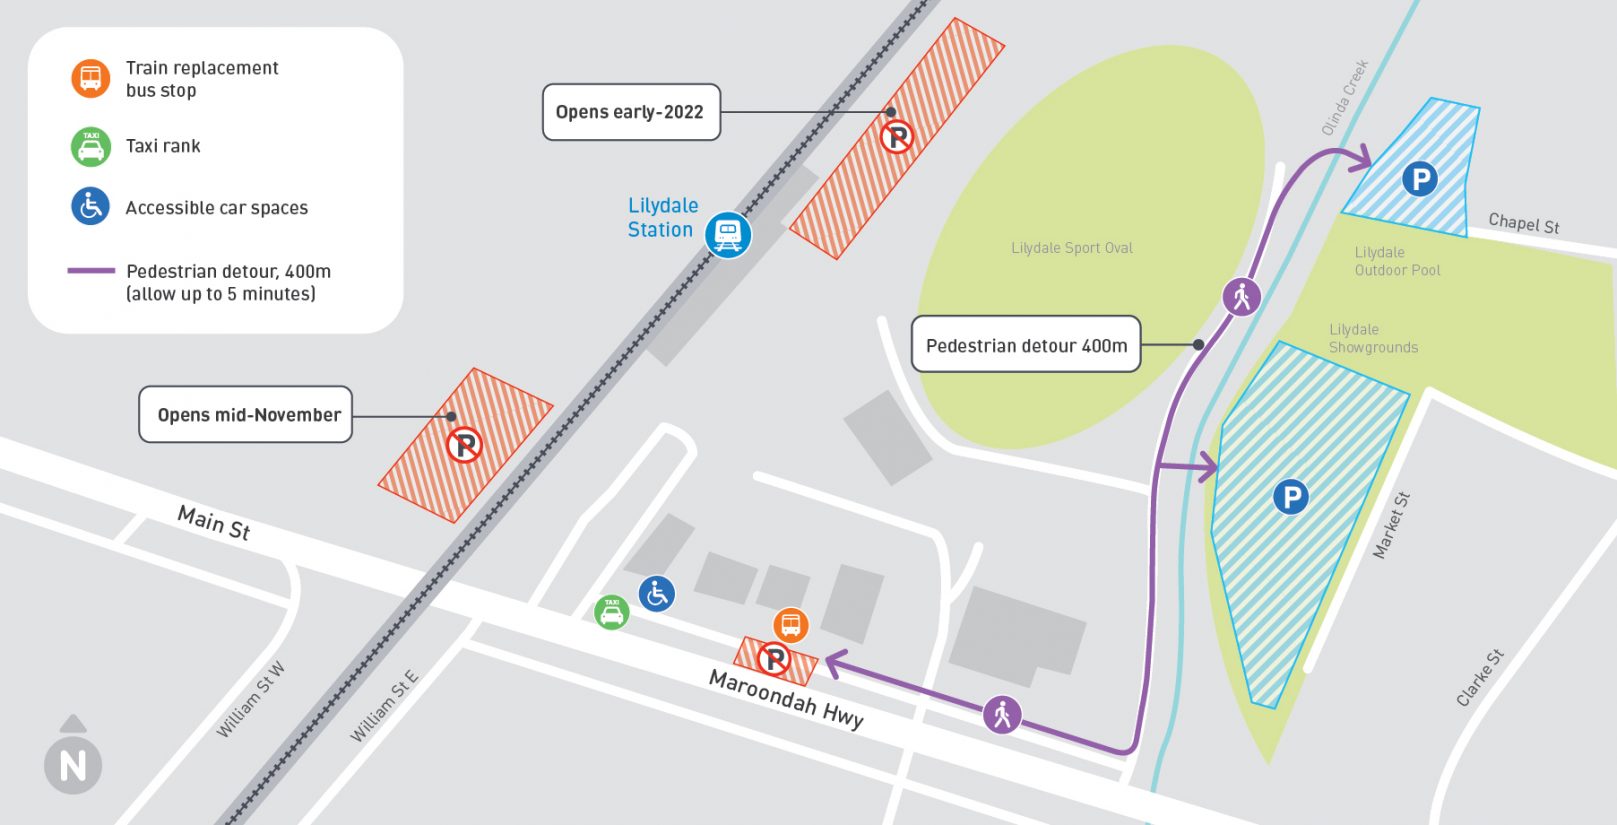 Lilydale Station car space closures - click to view larger version of map